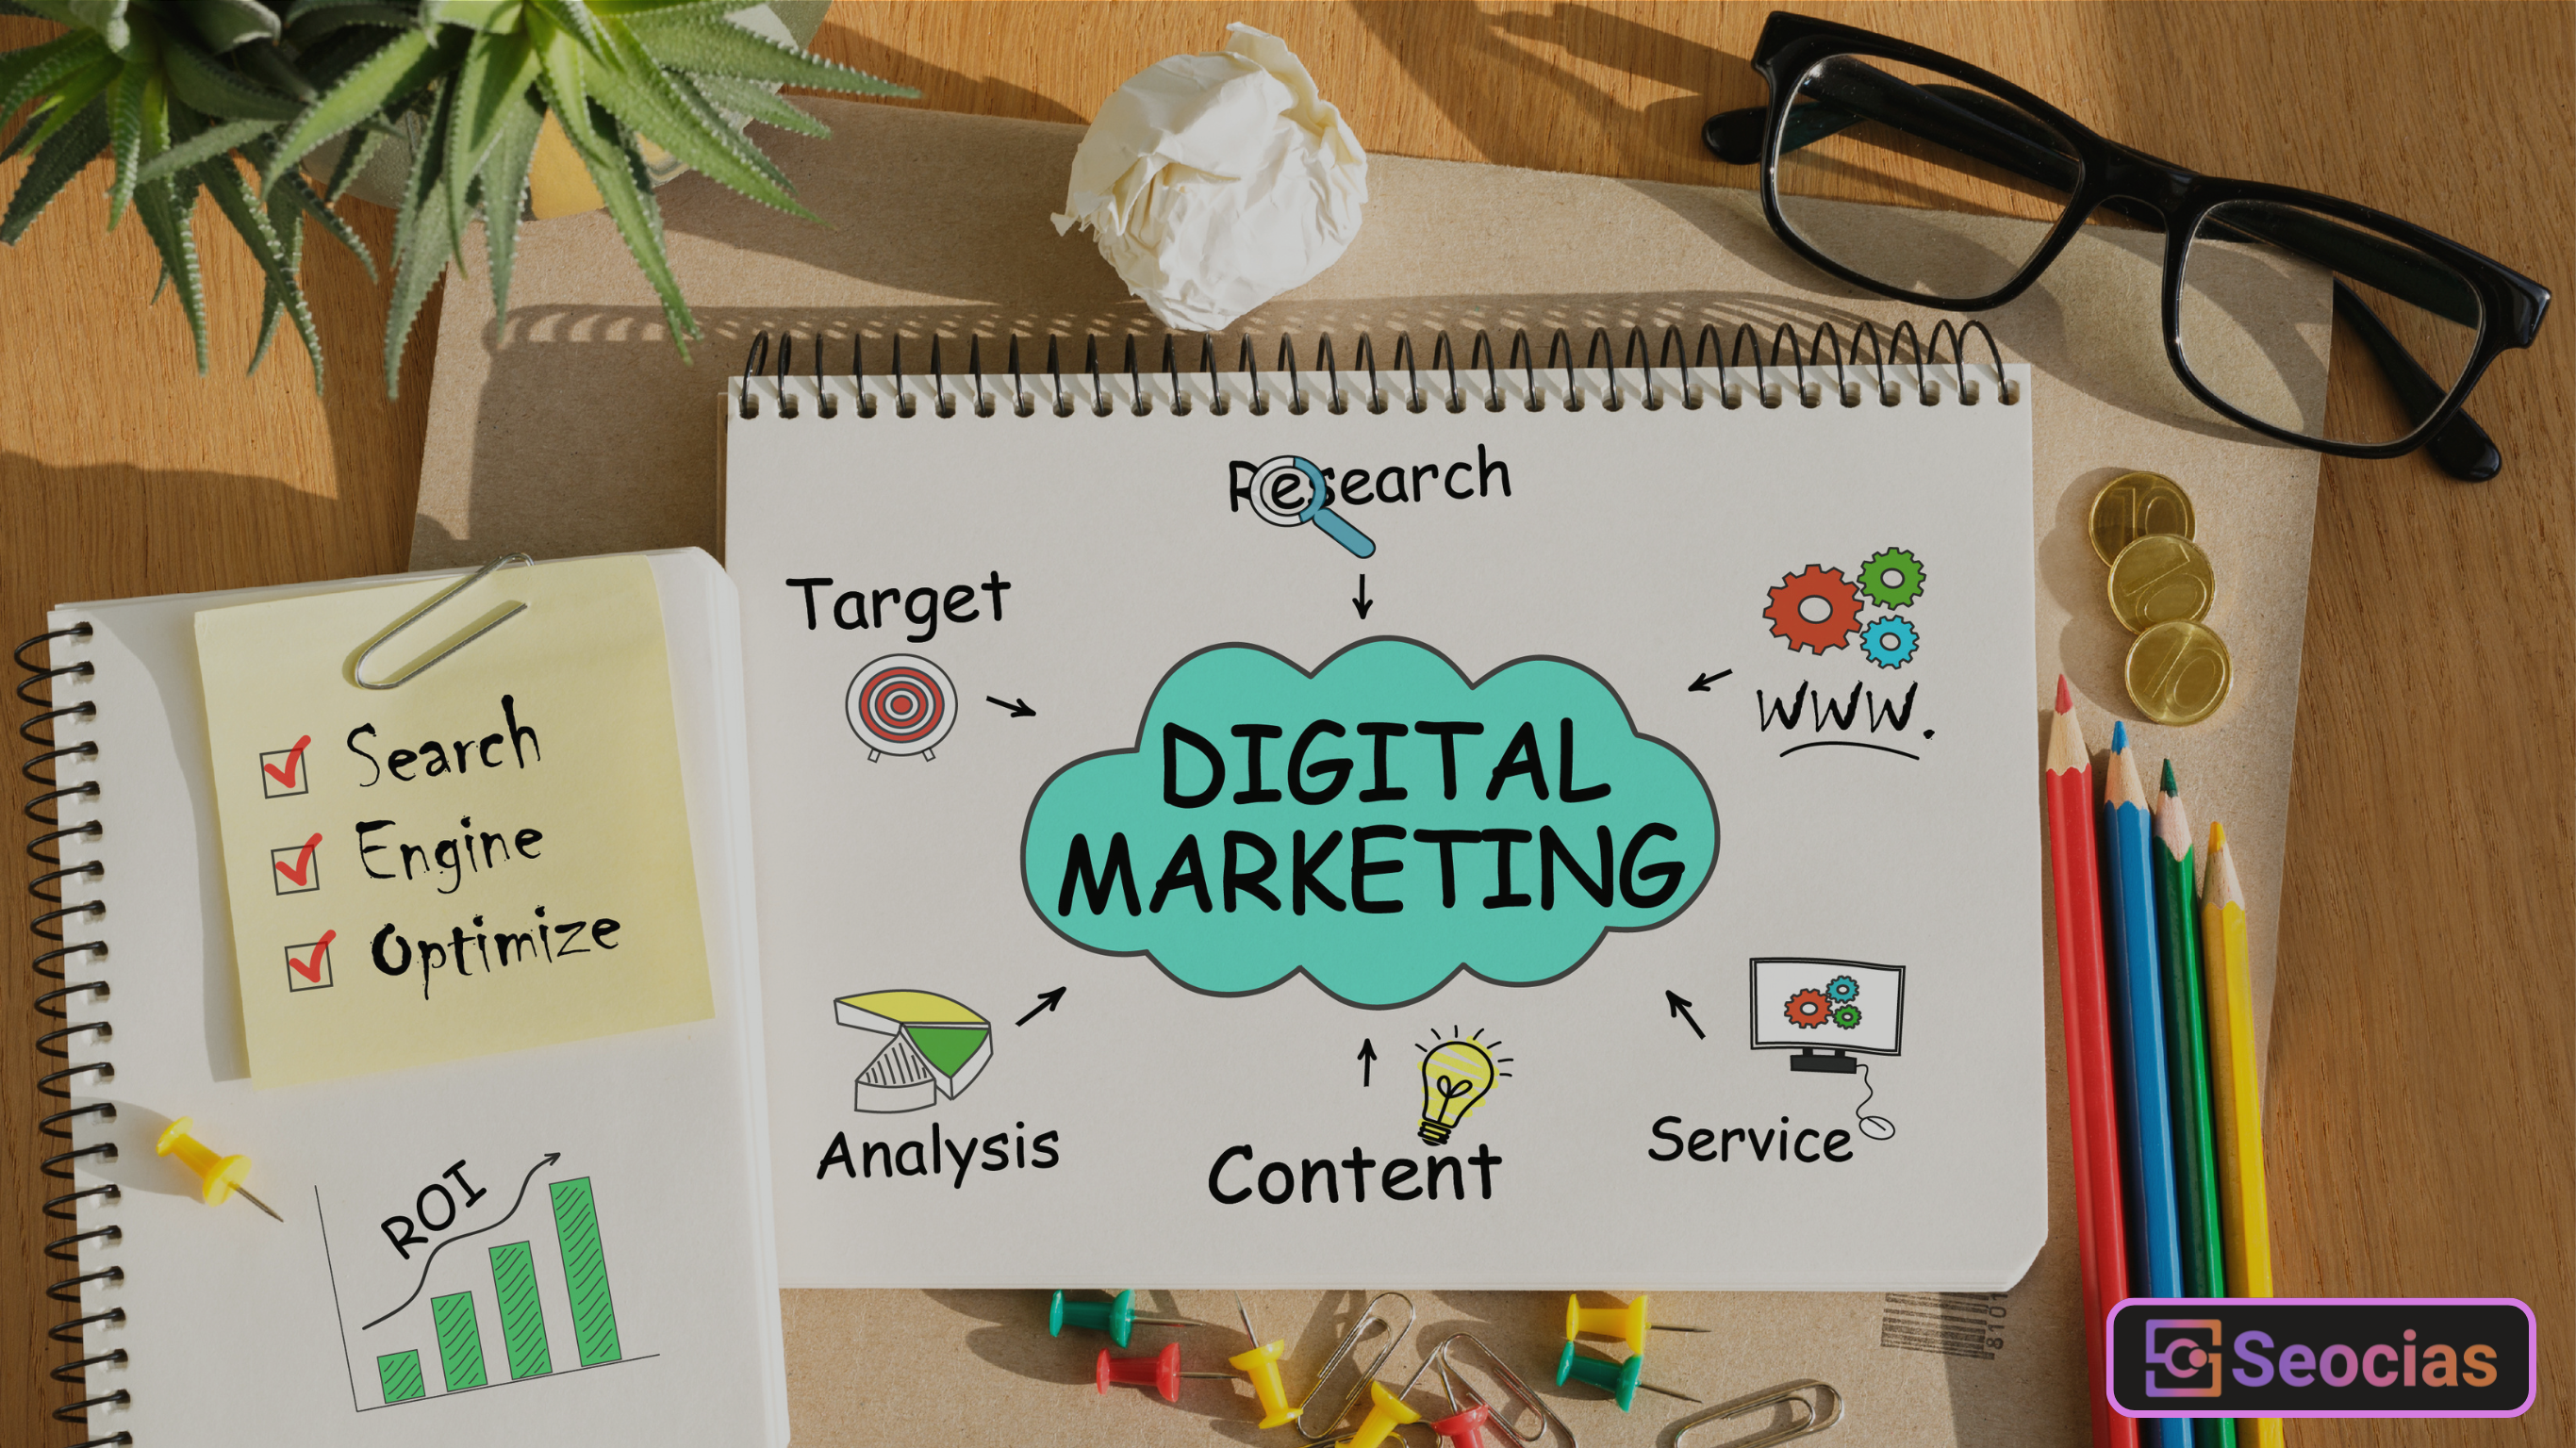 5 reasons why digital marketing is important